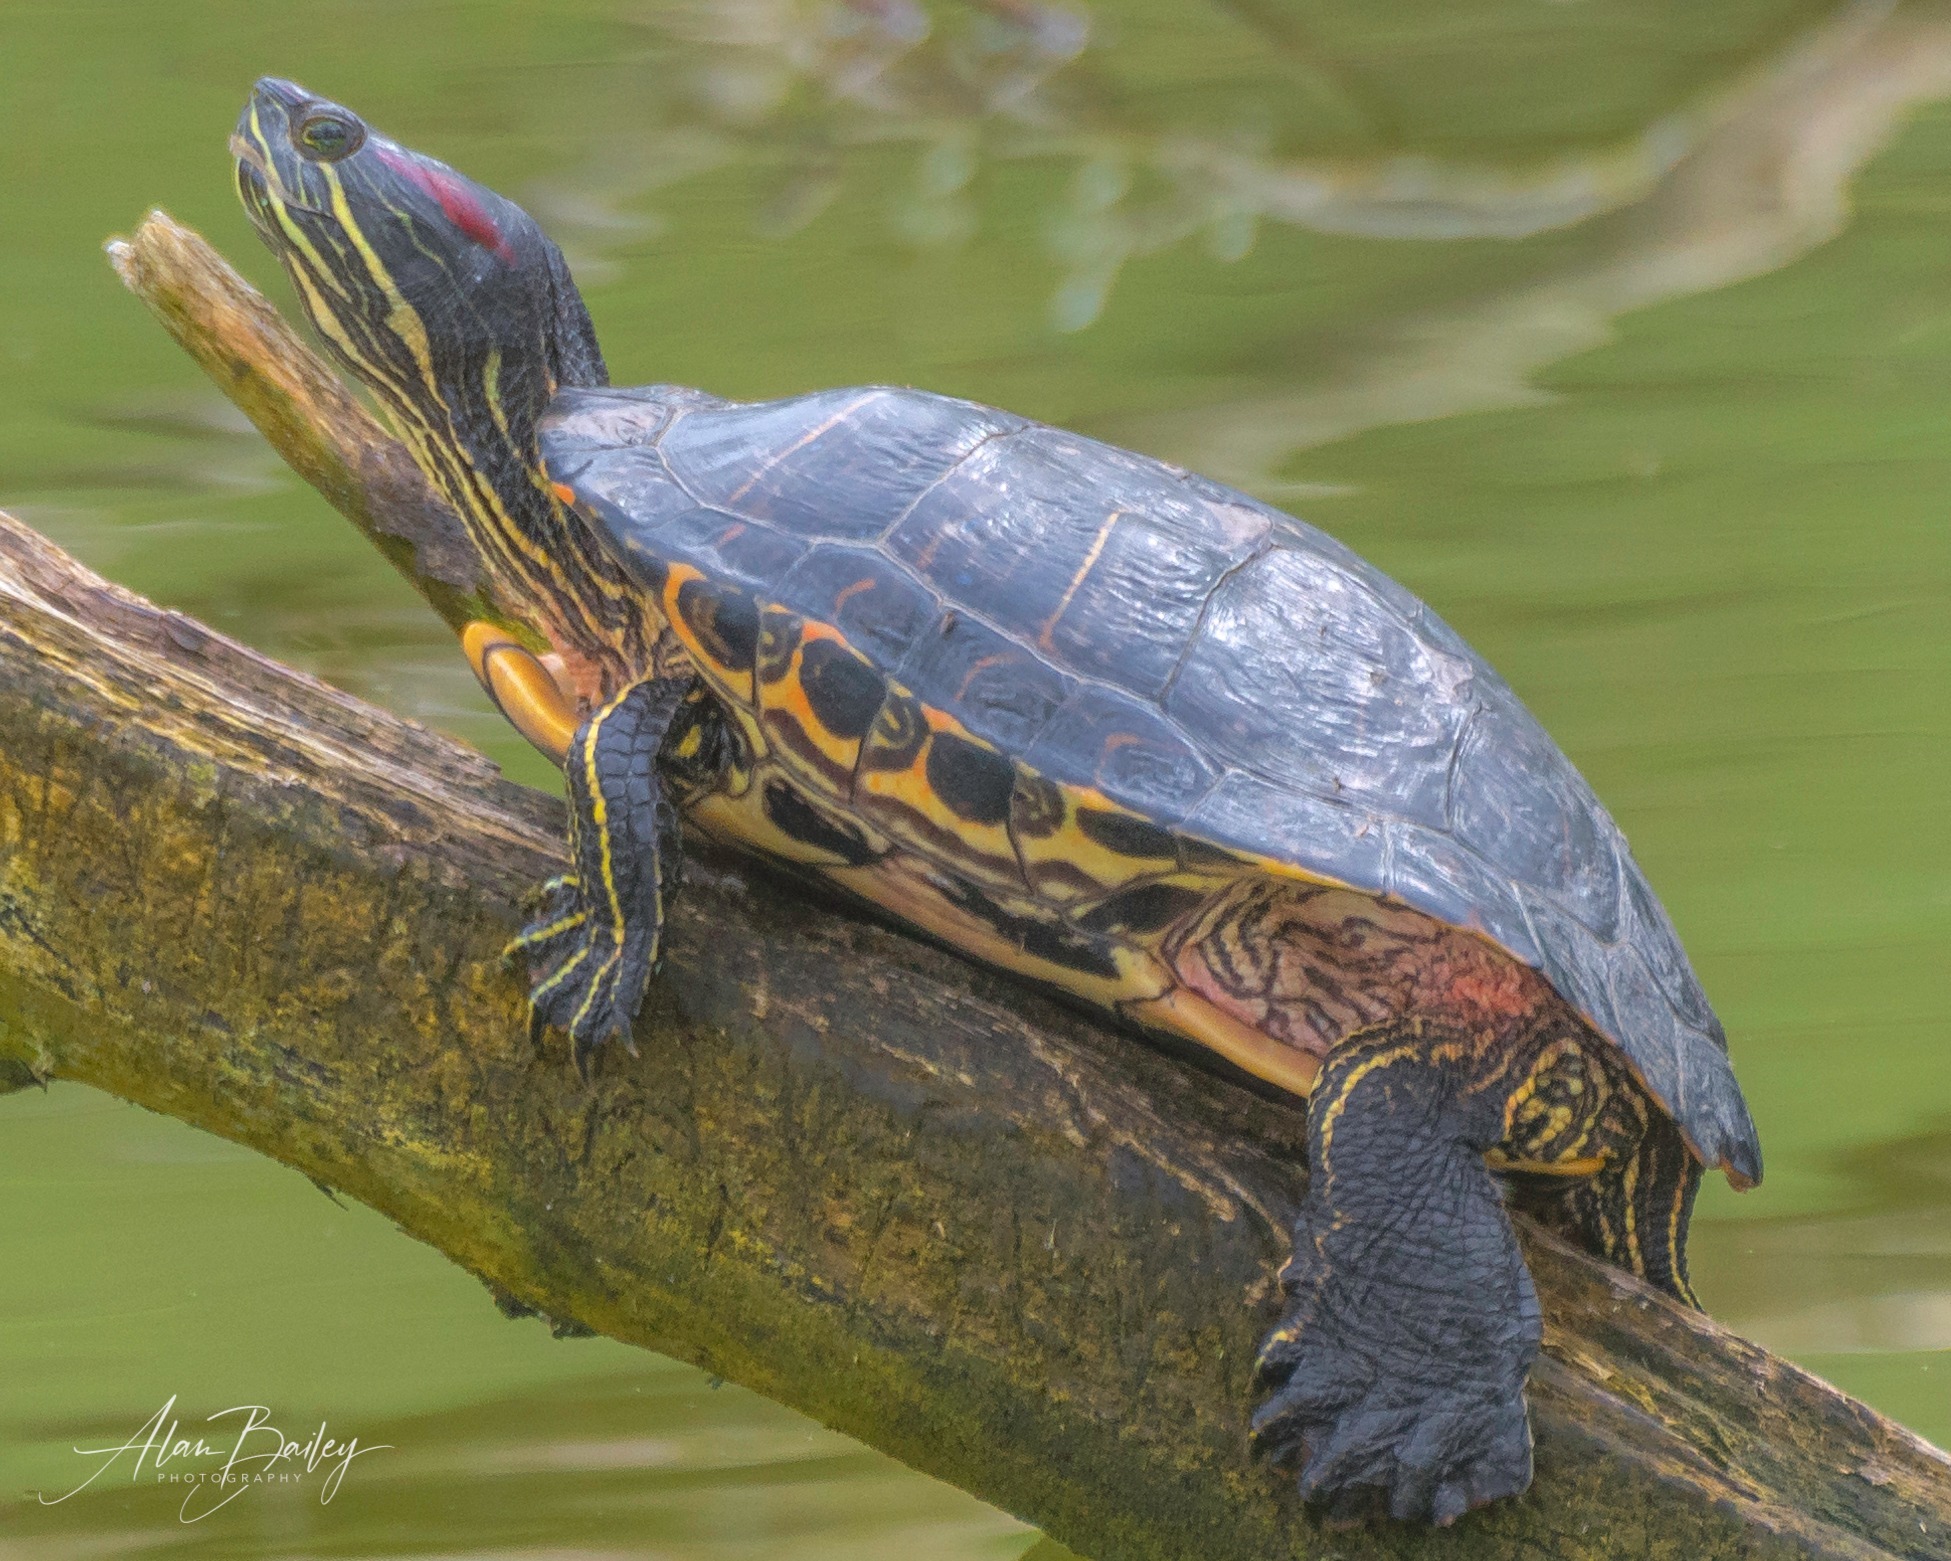 A red eared terrapin in the river Weaver by Alan Bailey